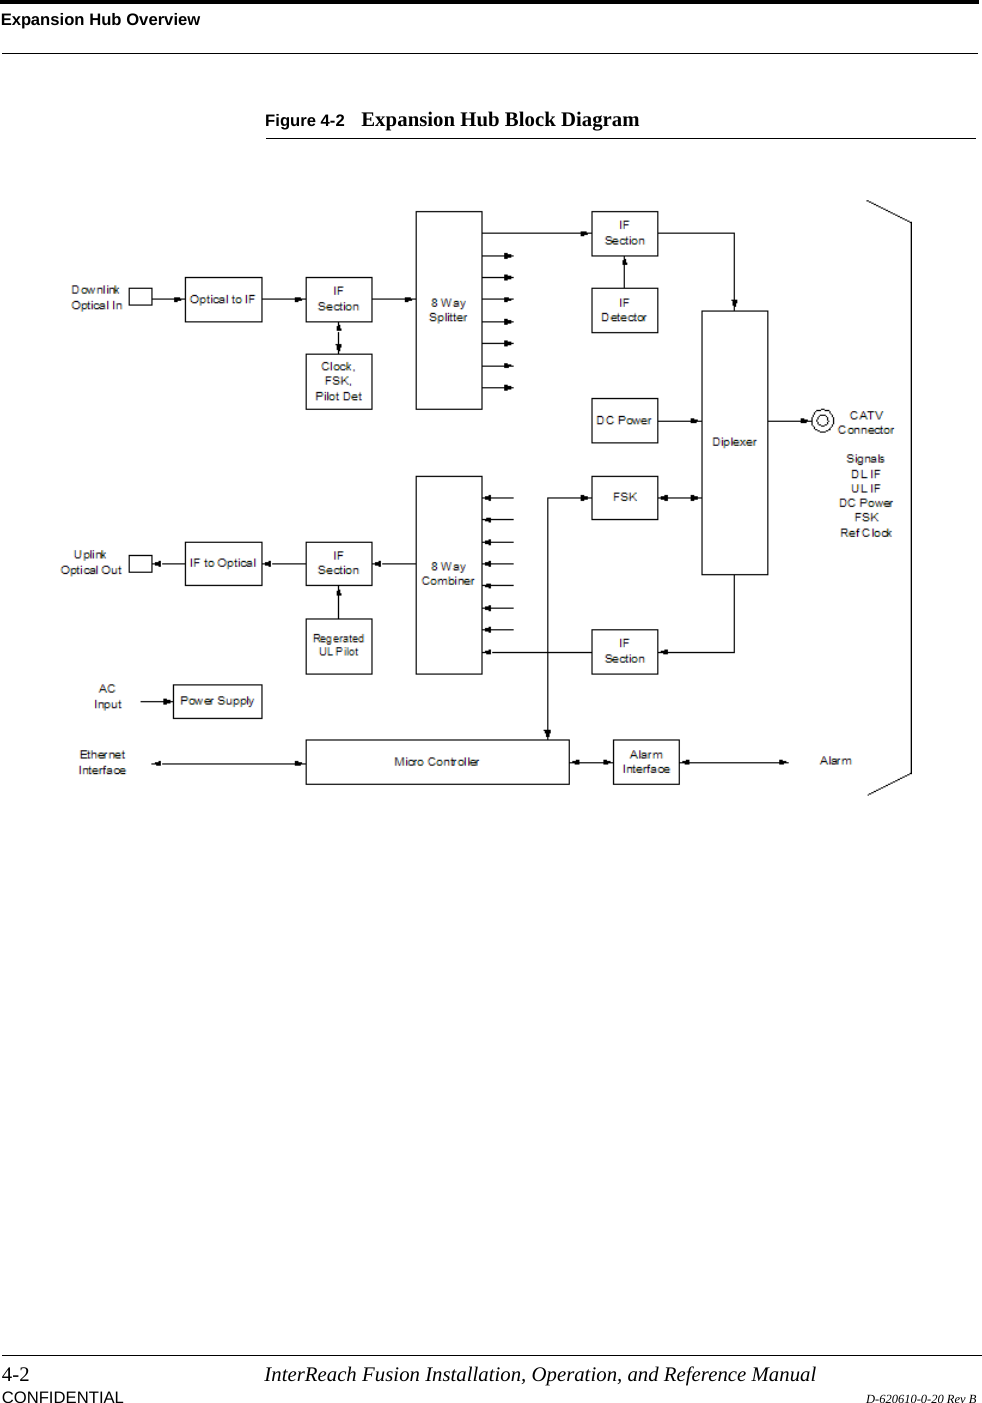 Expansion Hub Overview4-2 InterReach Fusion Installation, Operation, and Reference ManualCONFIDENTIAL D-620610-0-20 Rev BFigure 4-2 Expansion Hub Block Diagram